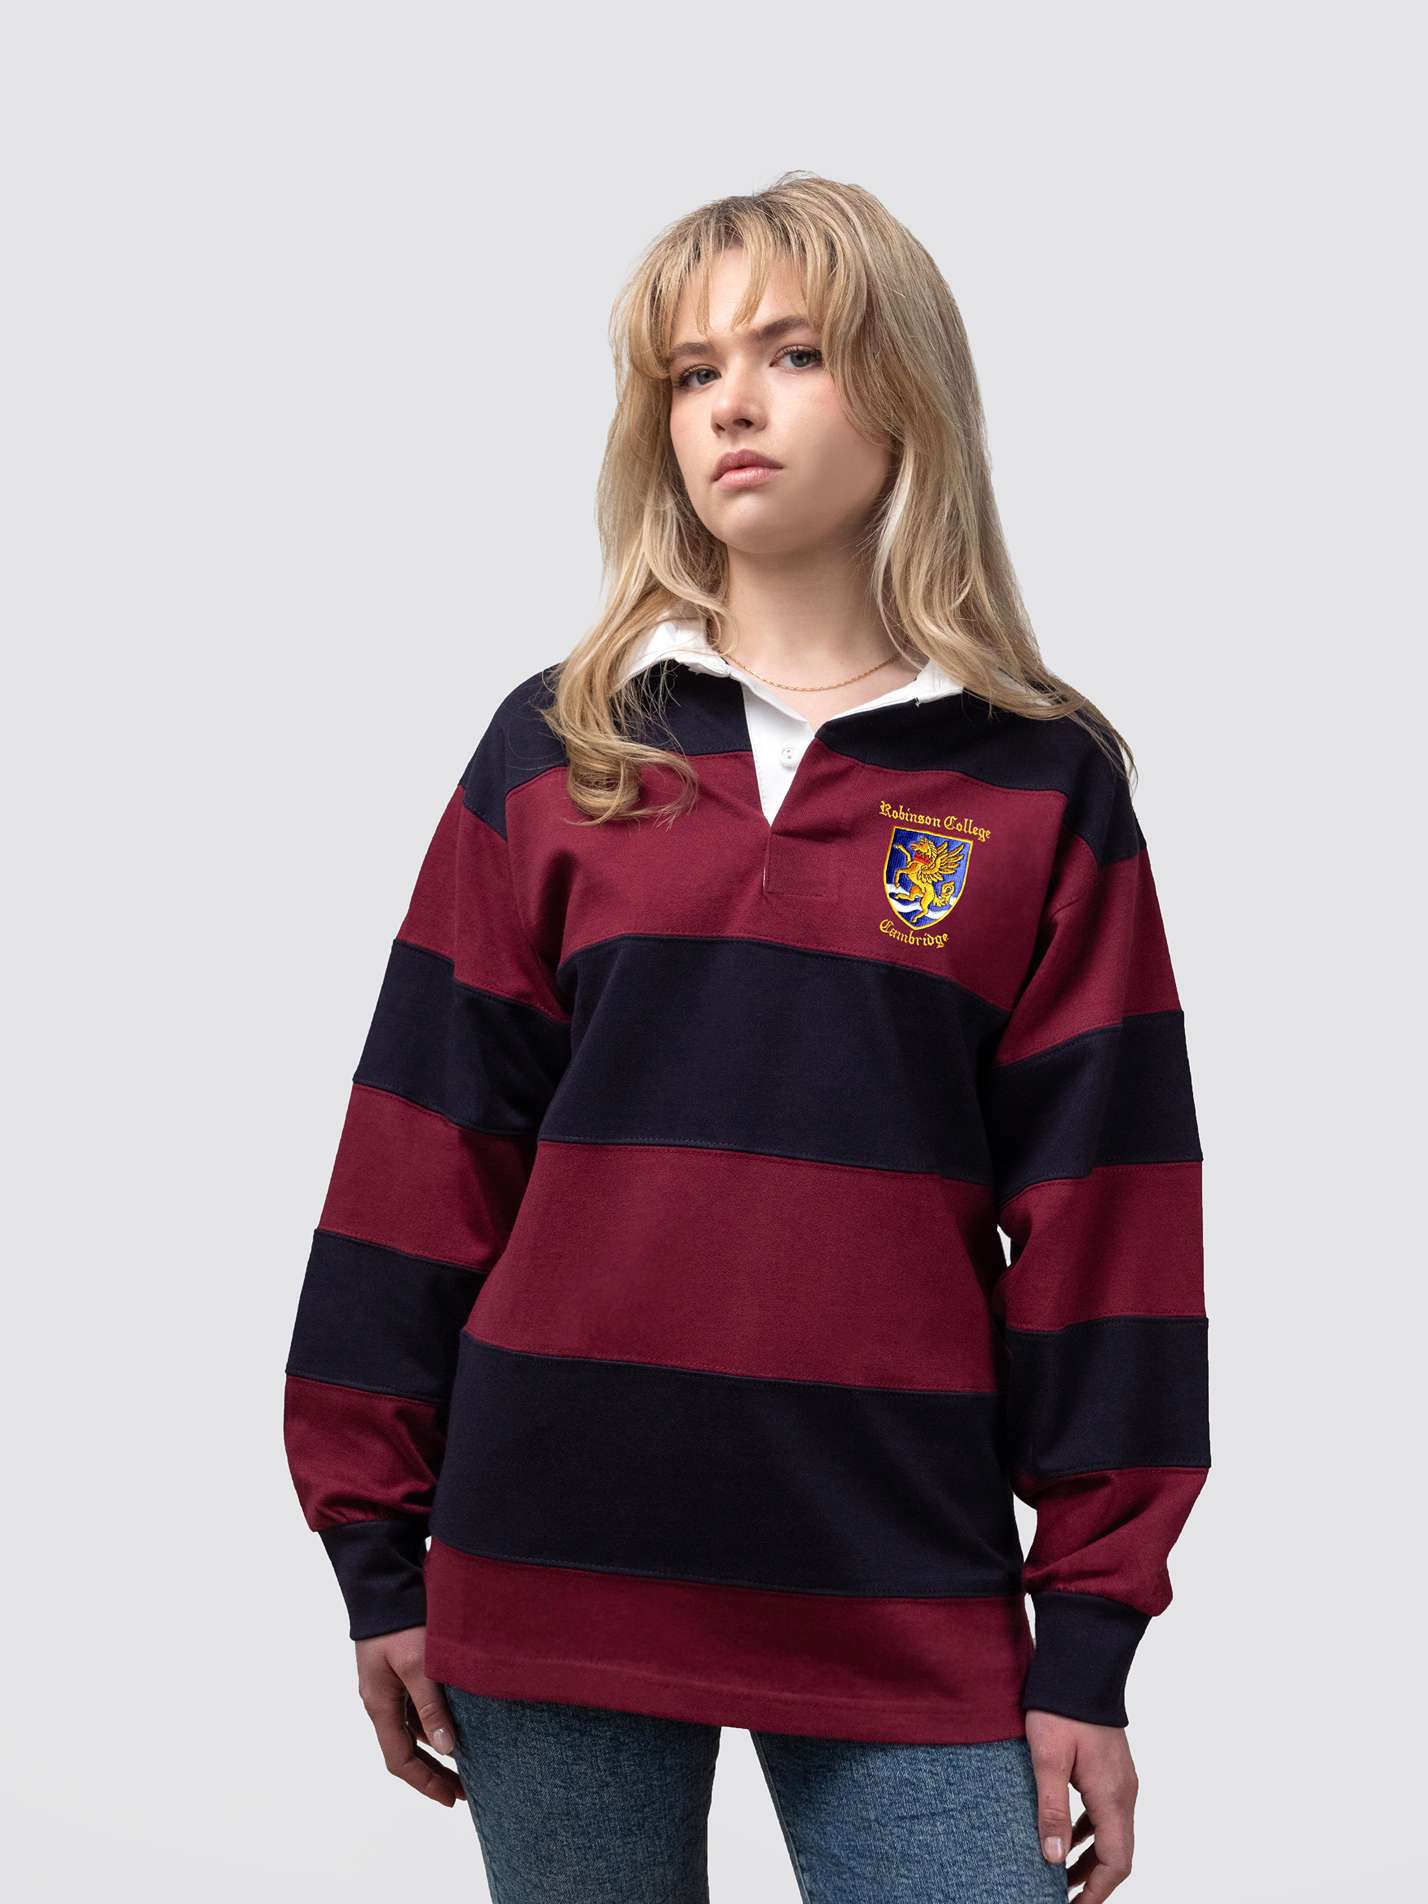 Robinson College rugby shirt, with burgundy and navy stripes